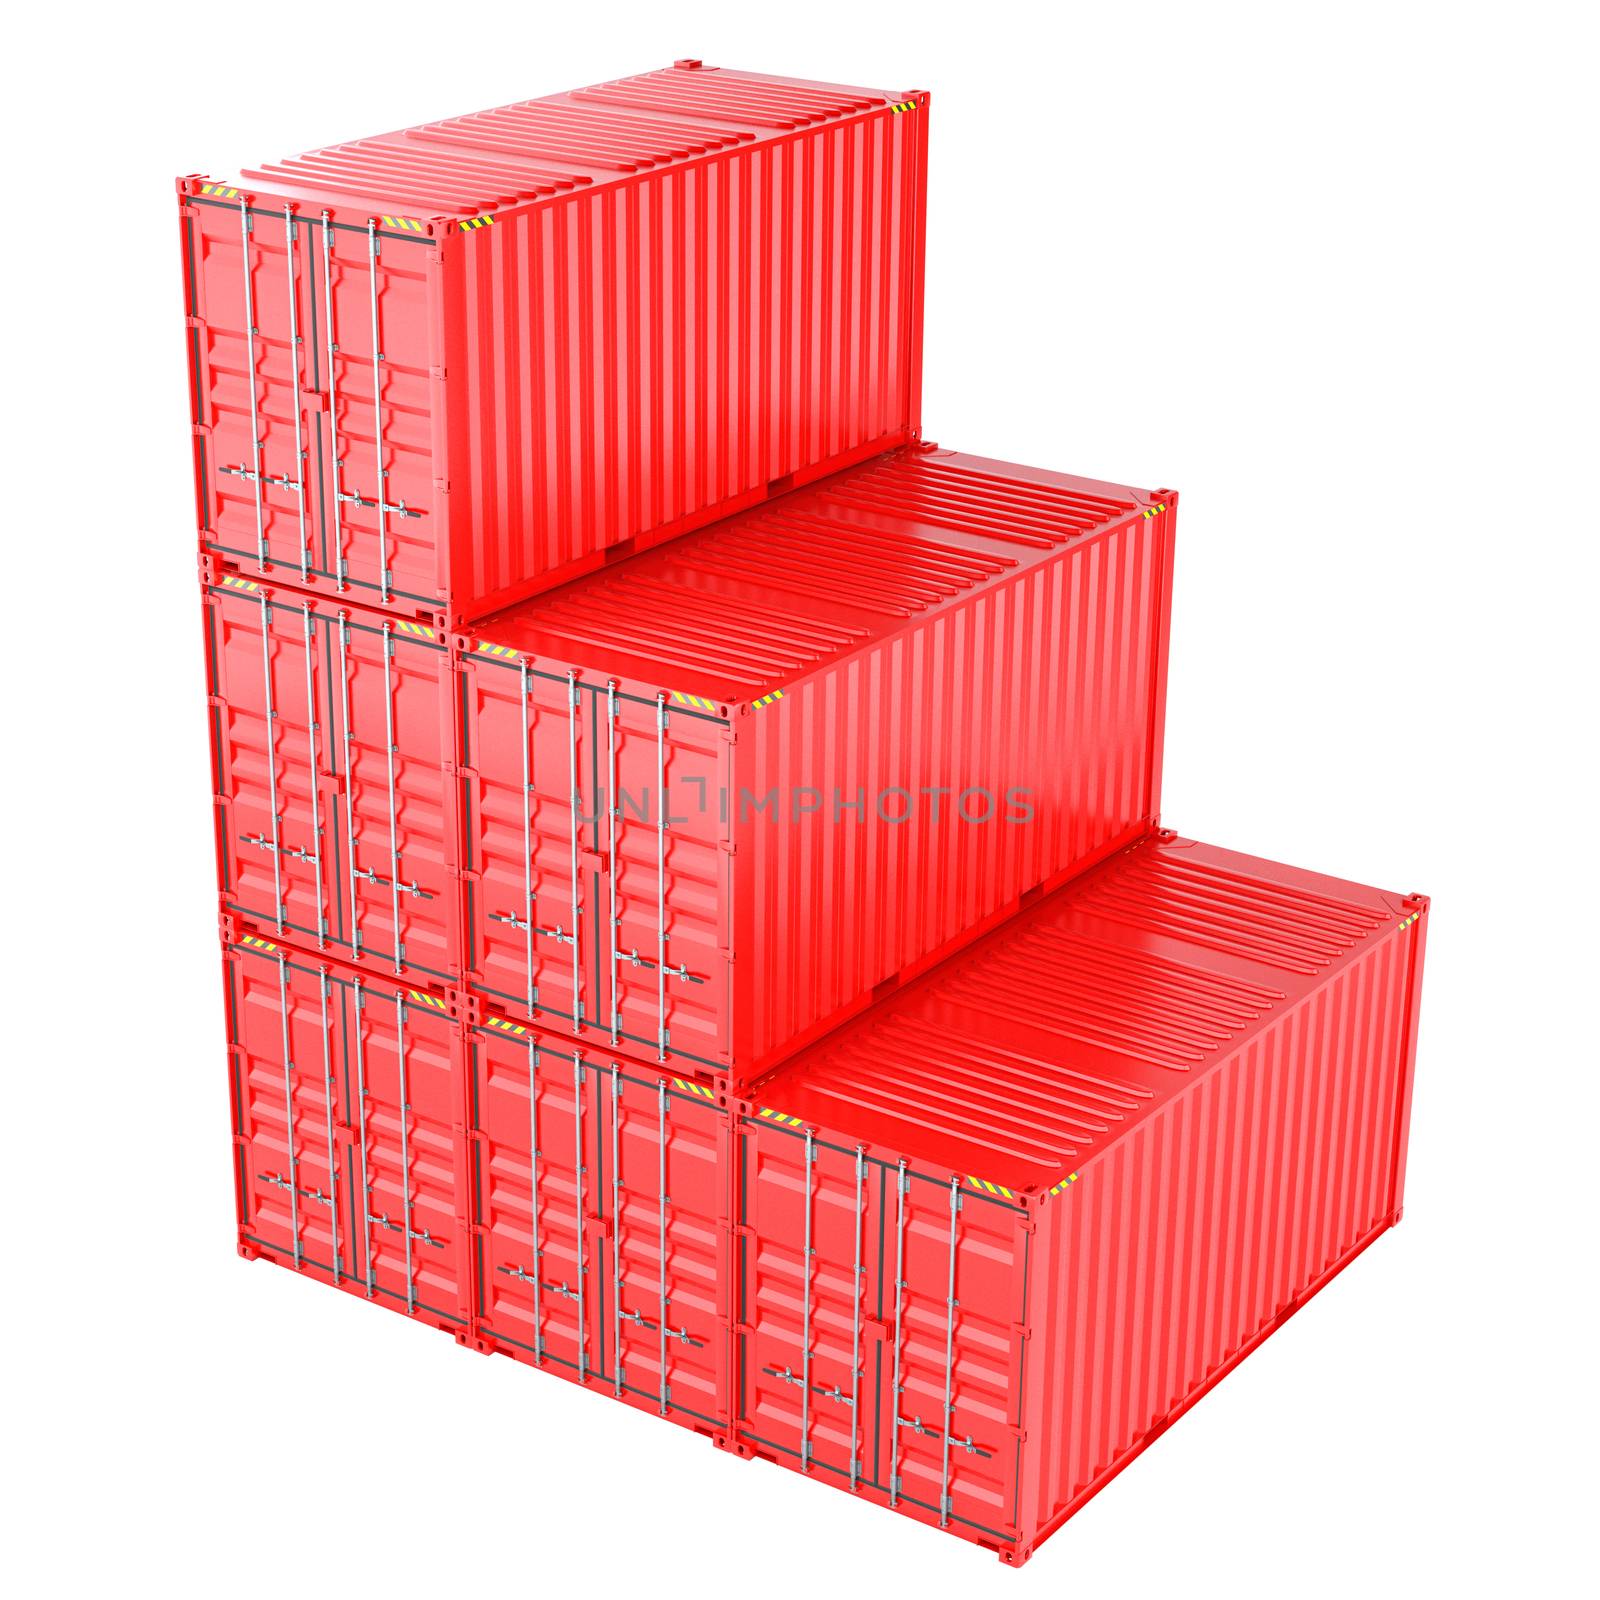 A Stack of Cargo Containers for Overseas Shipping. 3D Rendering